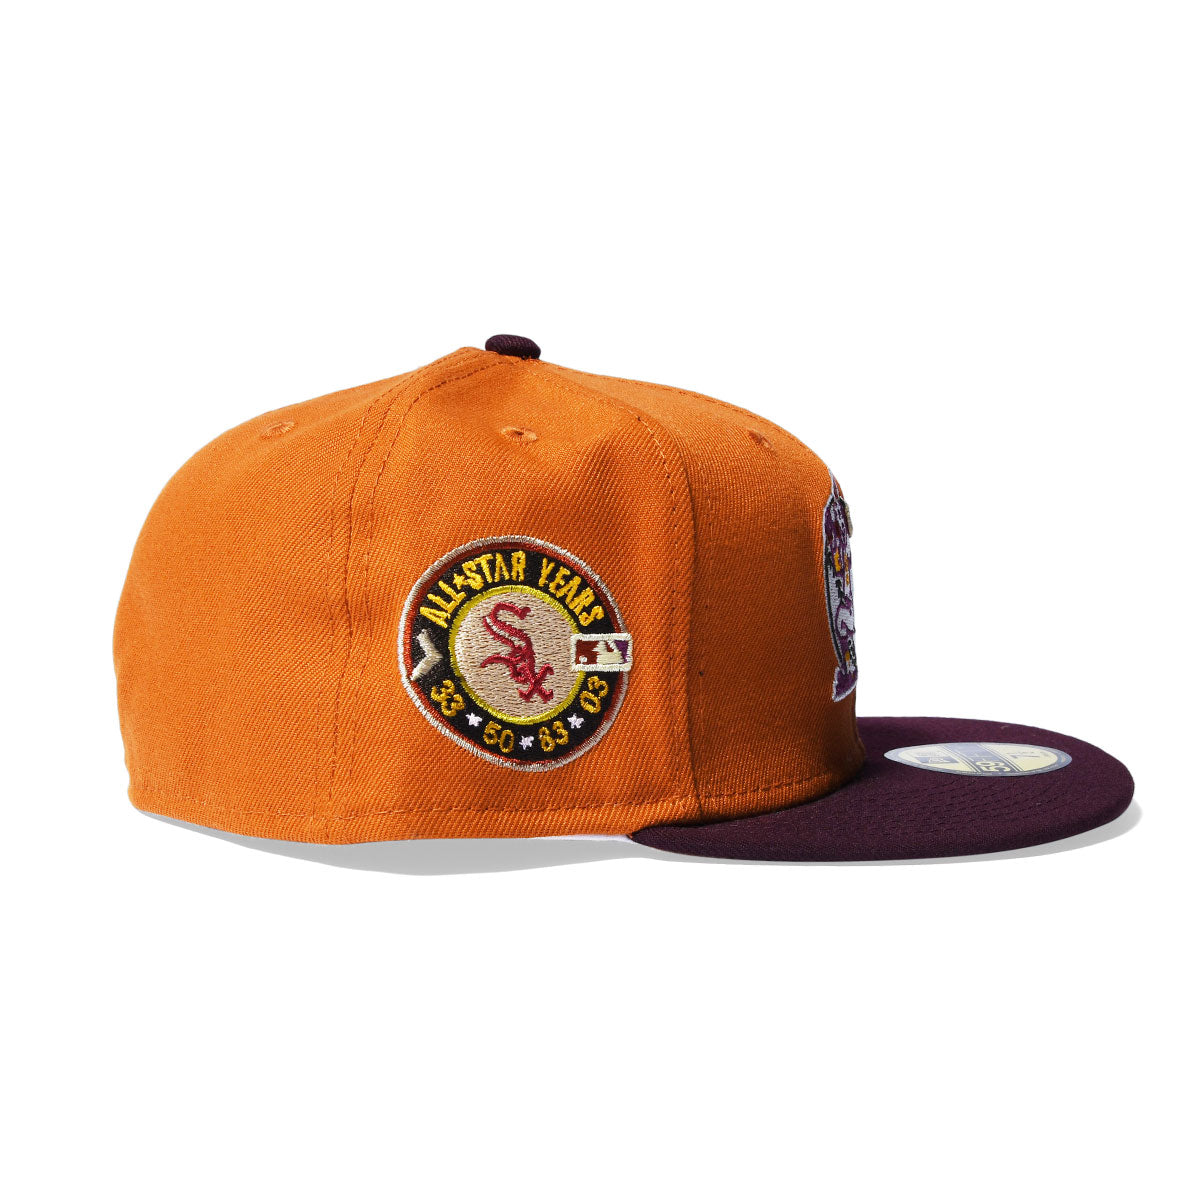 NEWERA Chicago White Sox - 59FIFTY ALL-STAR YEARS